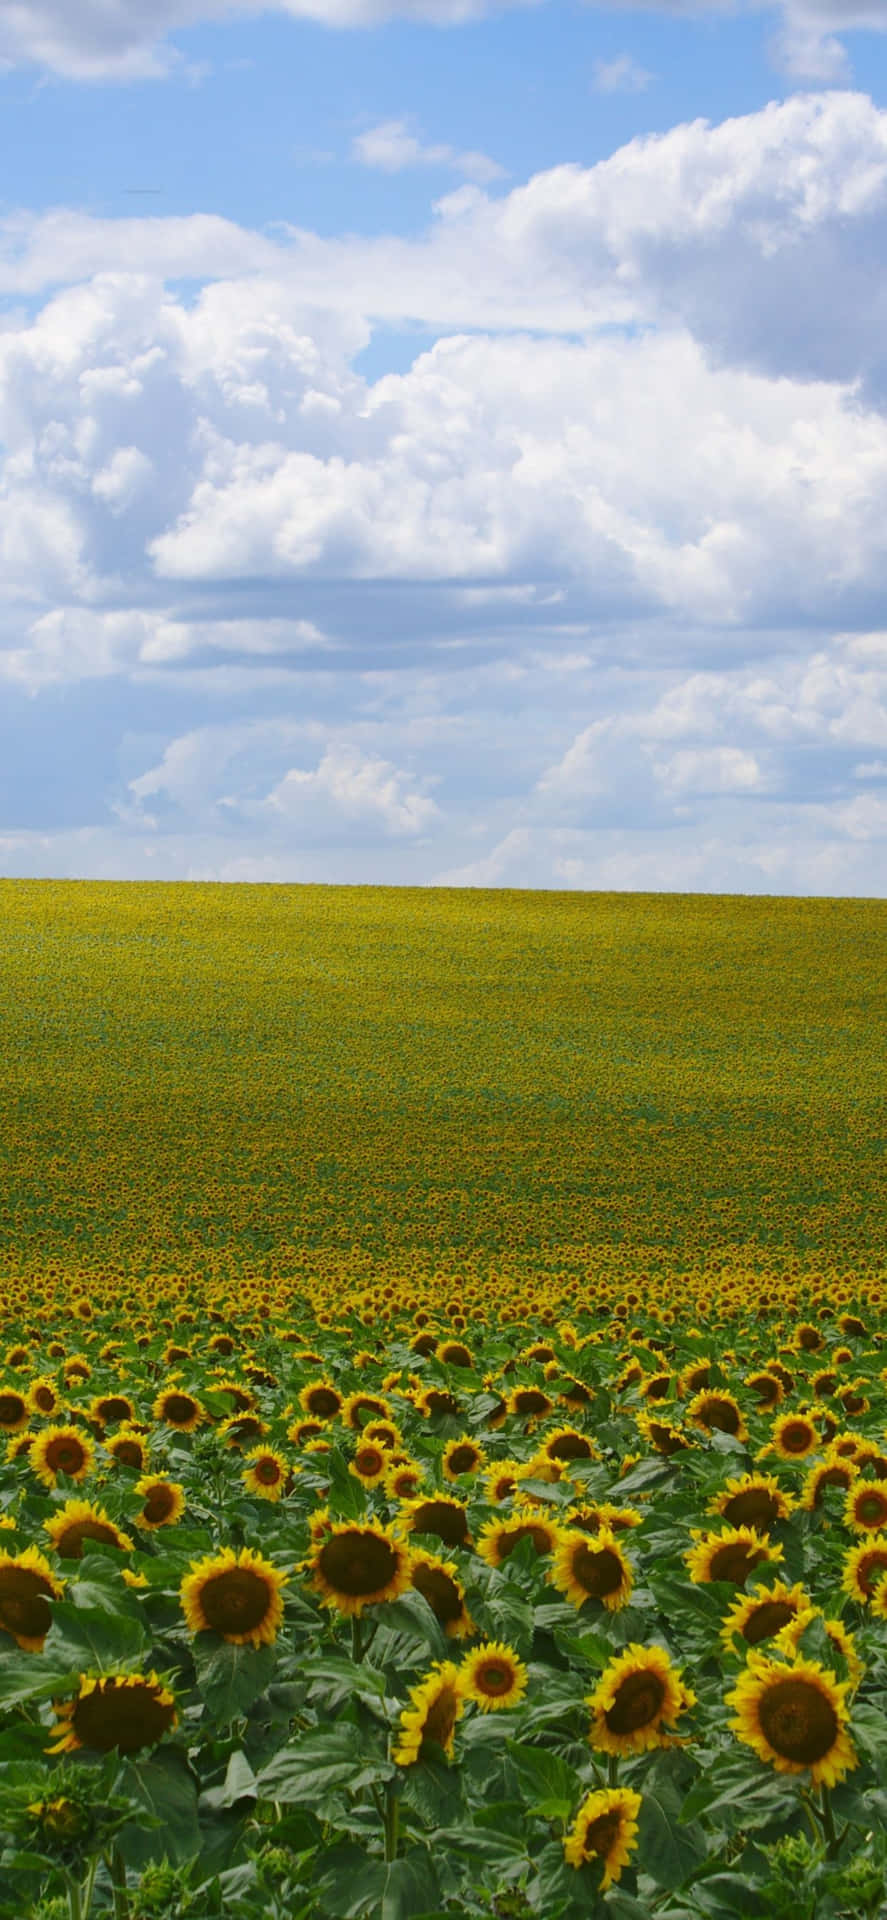 Sunflower field with vibrant colors.